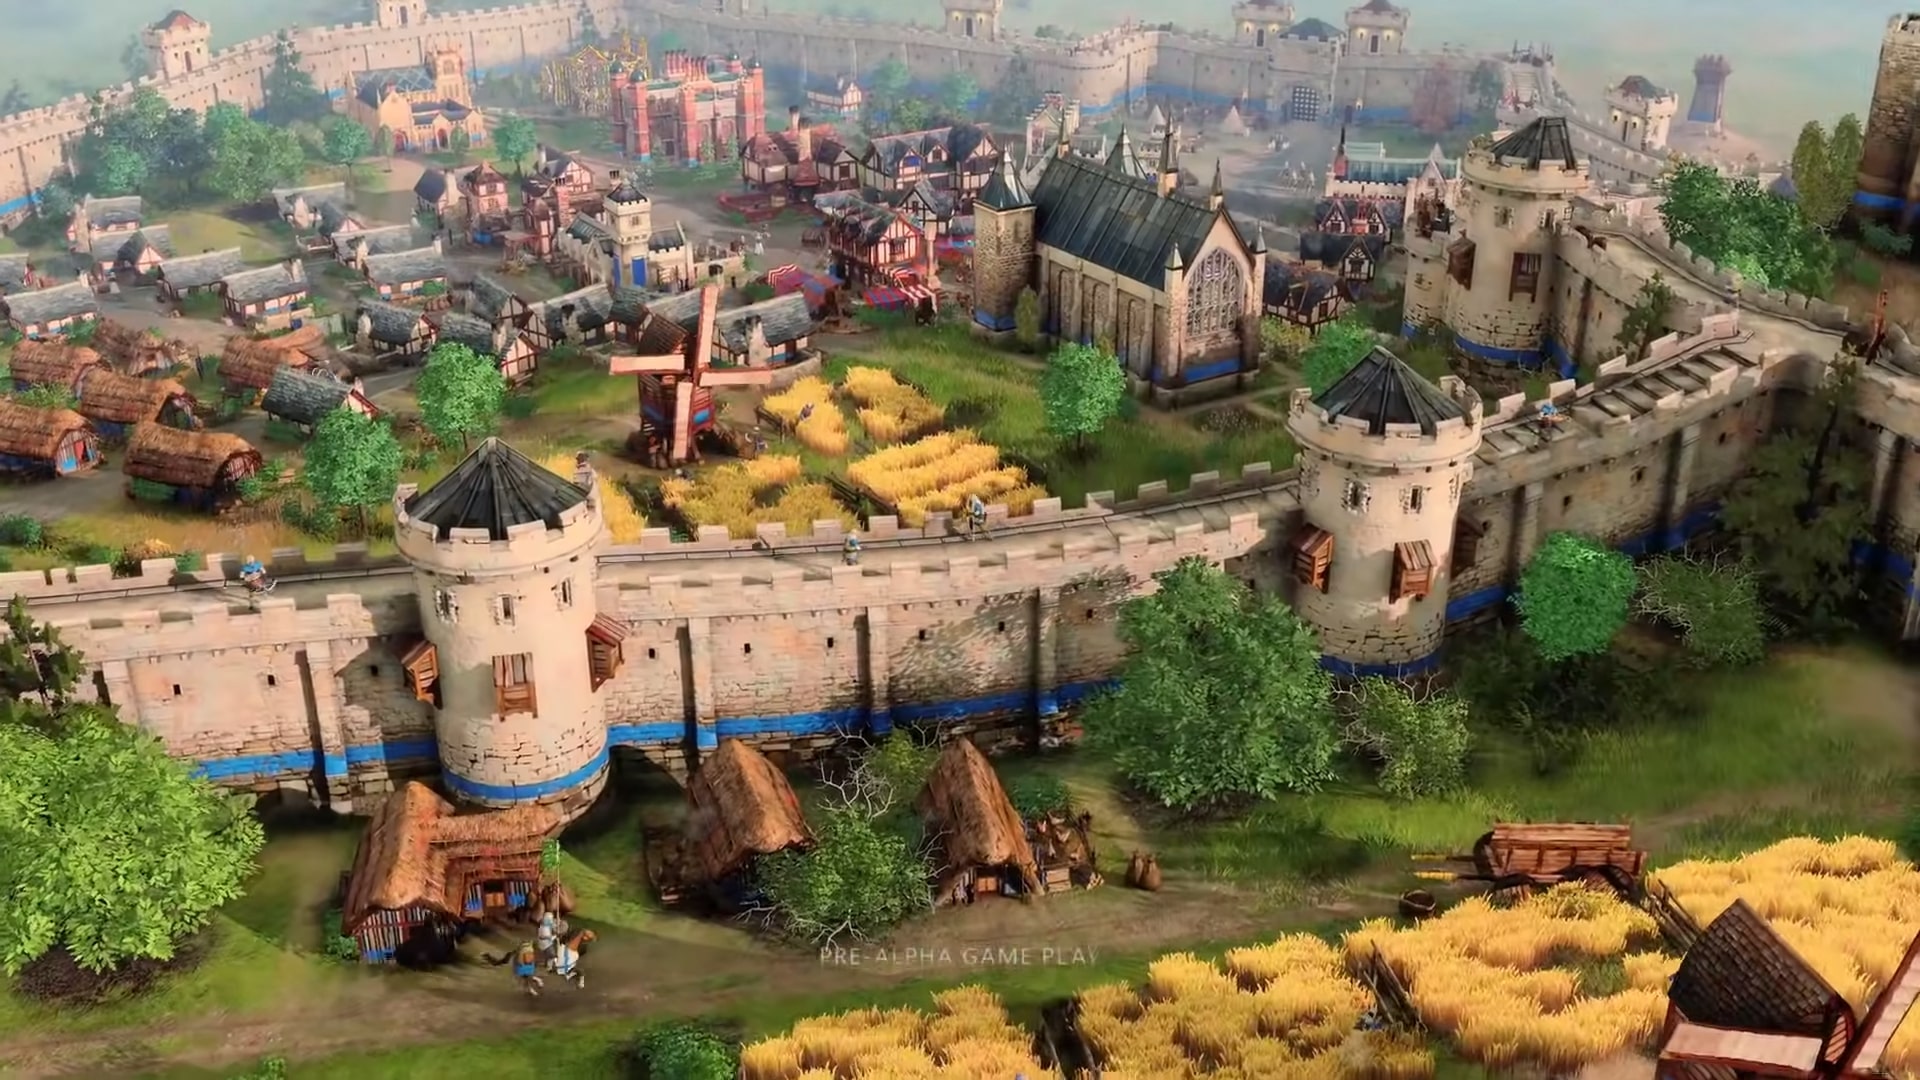 10 strategy games like Age of Empires to play right now